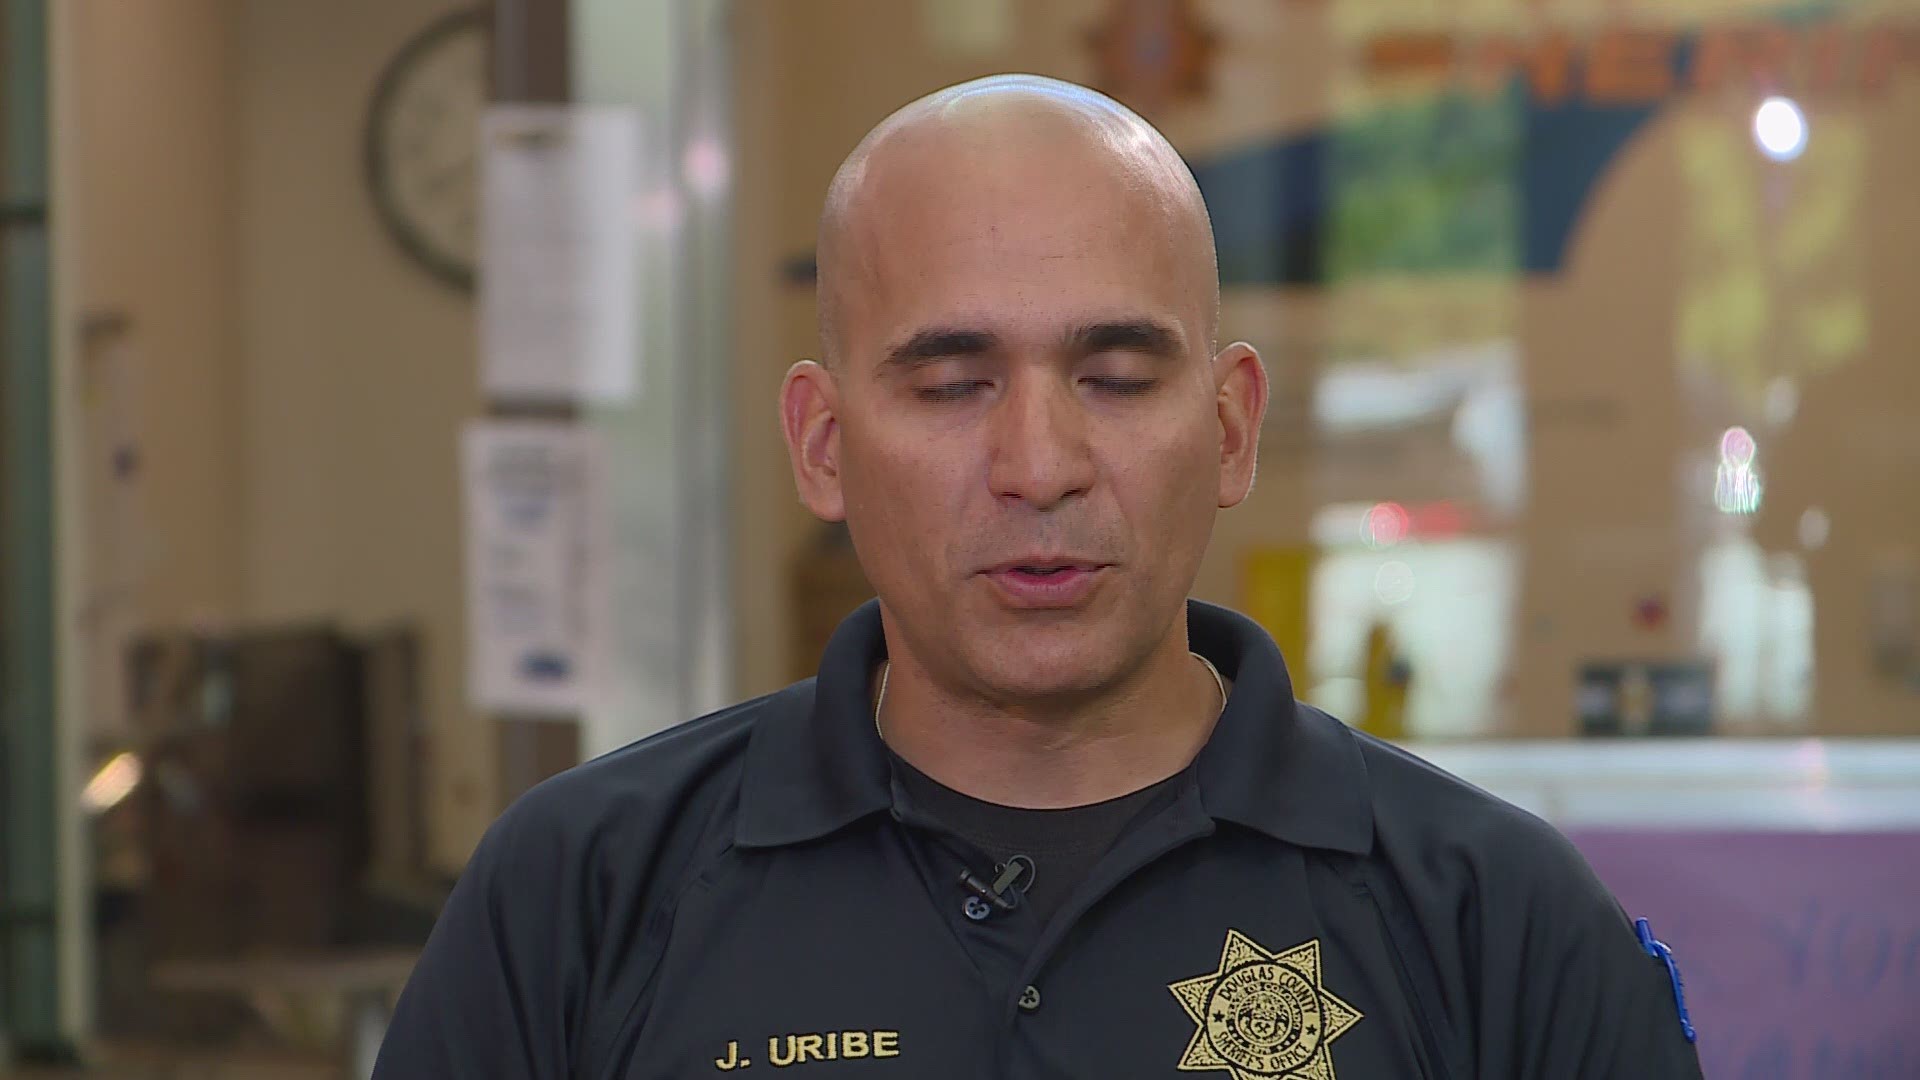 Douglas County Sheriff’s Deputy Gabriel Uribe spoke exclusively to 9NEWS before his first day on-duty Wednesday.